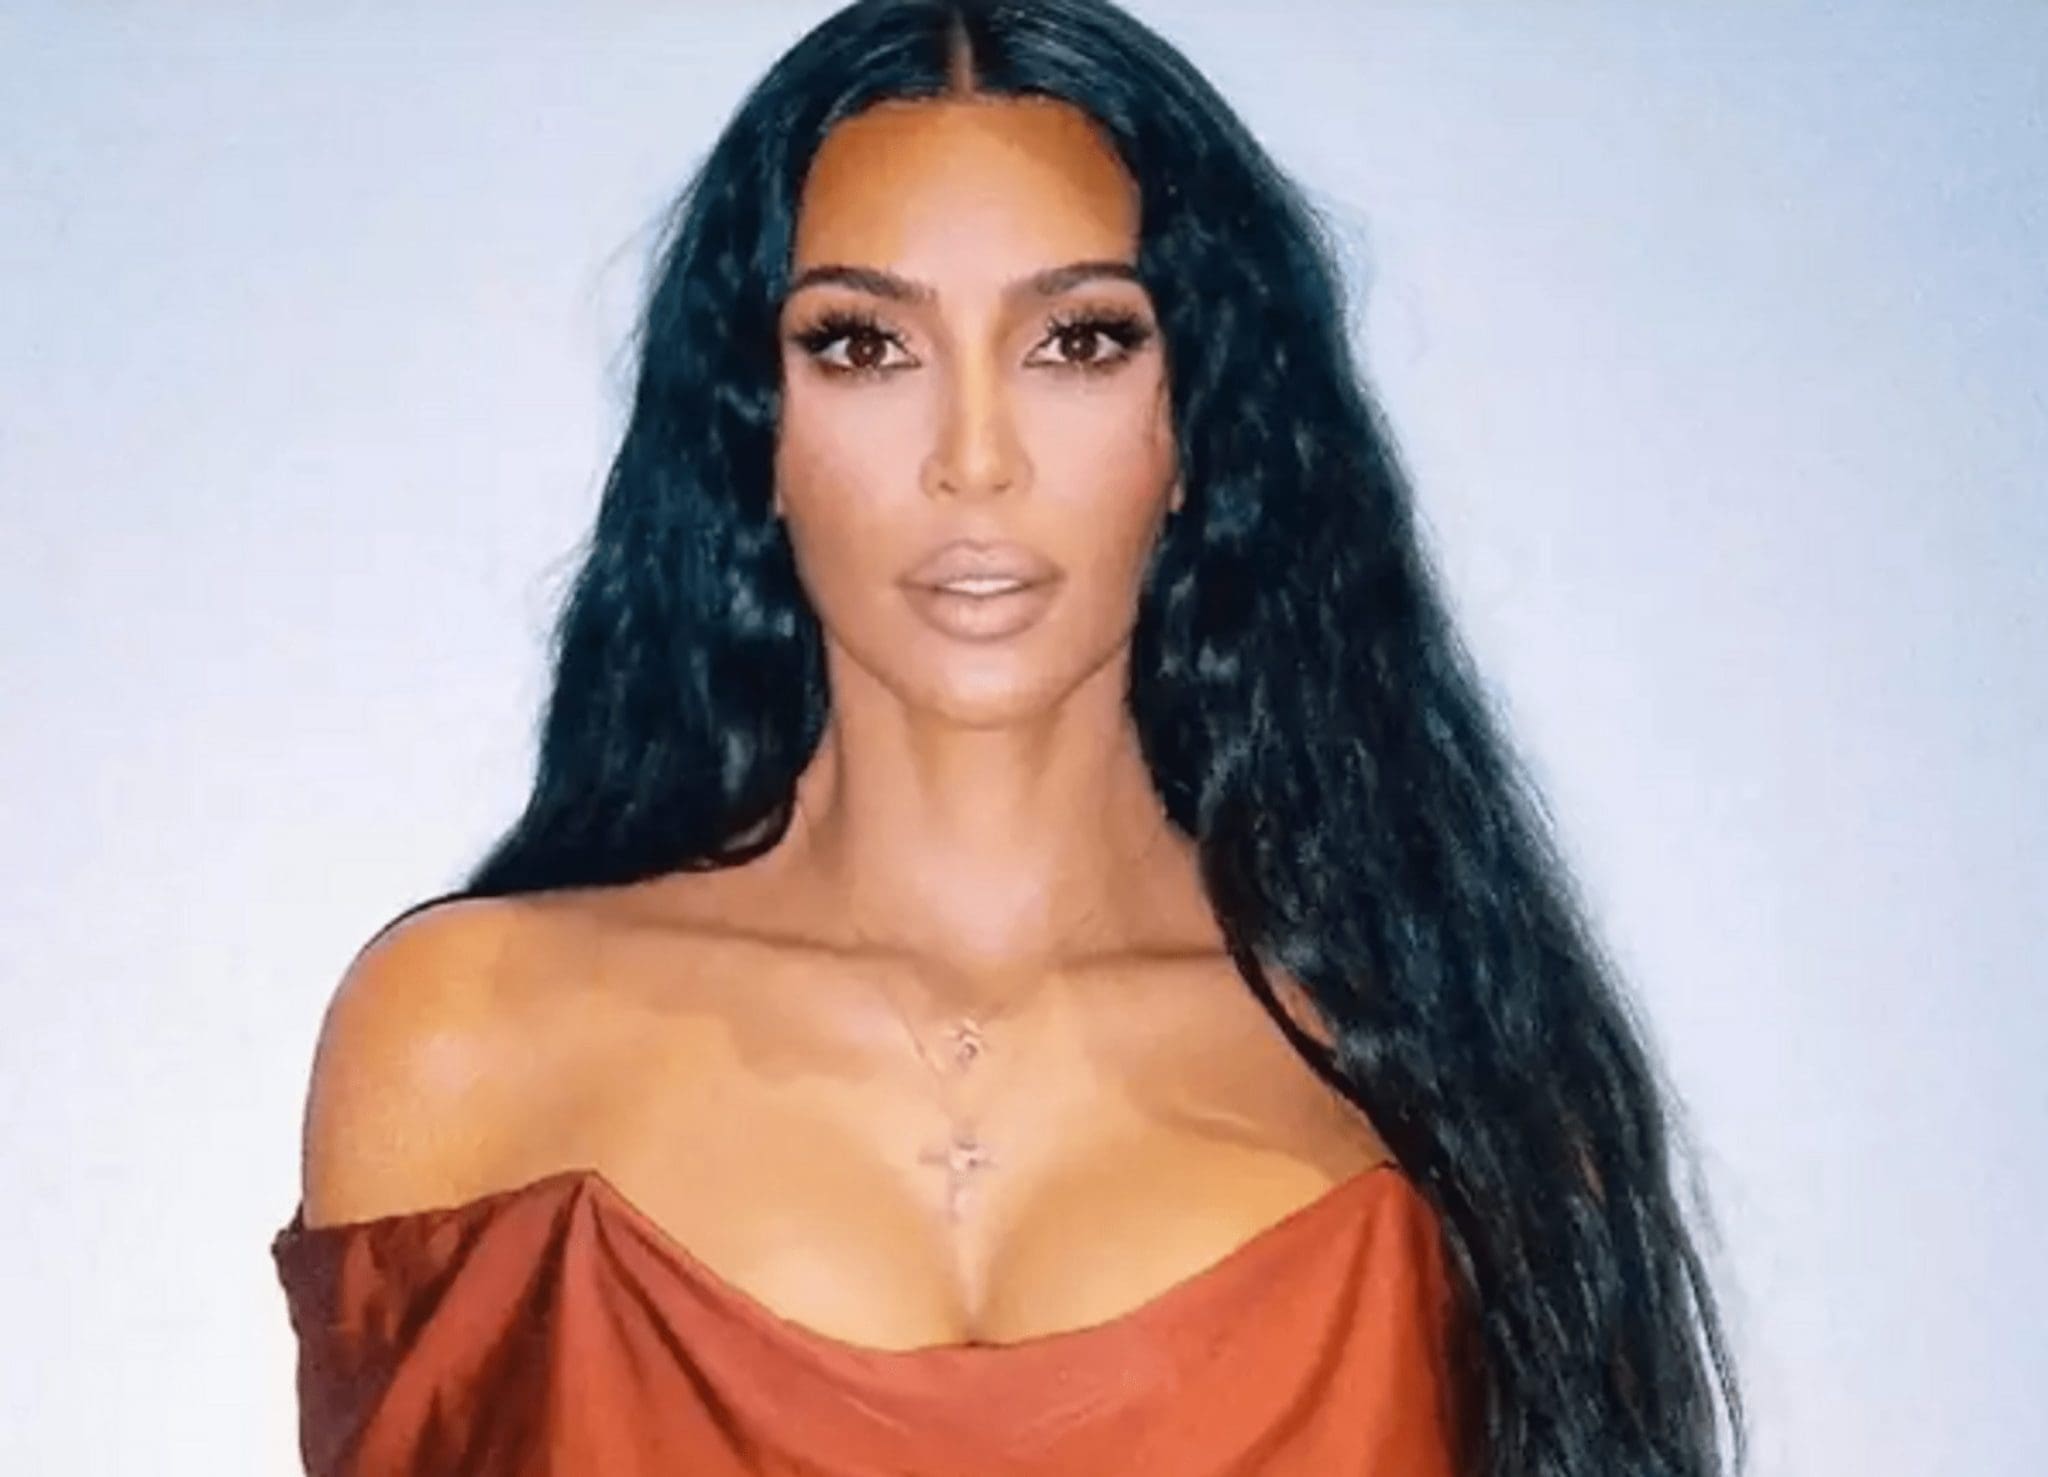 After 40, Kim Kardashian opens up about Intimate